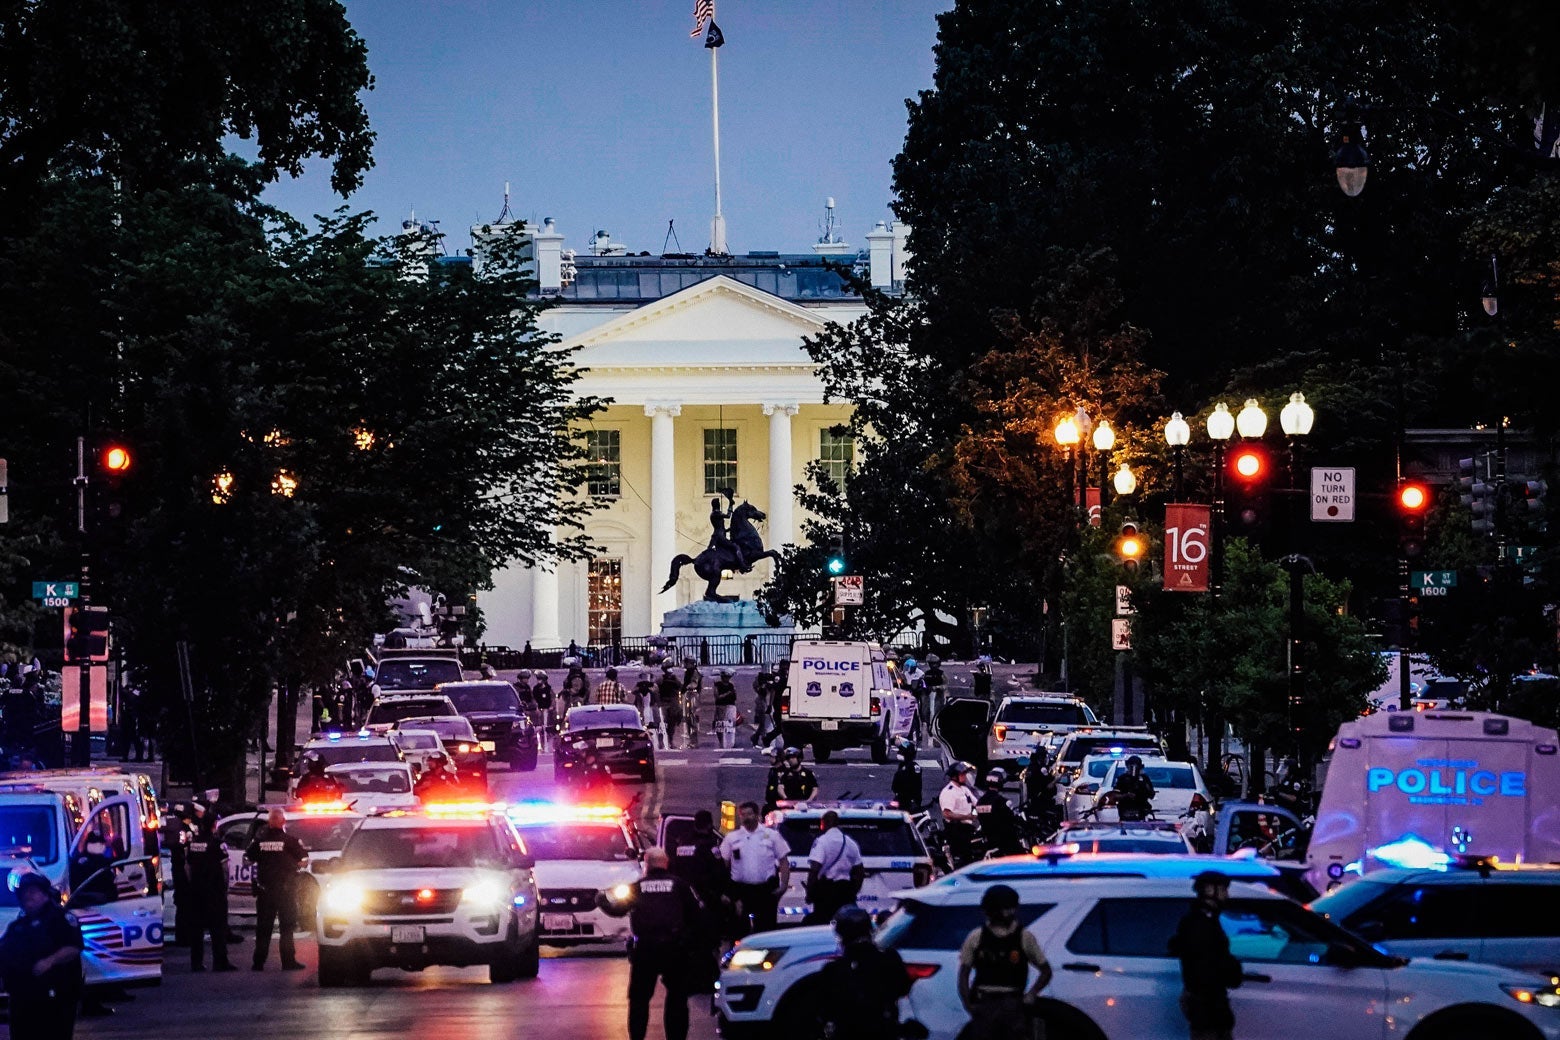 Many police officers and vehicles in front of the White House